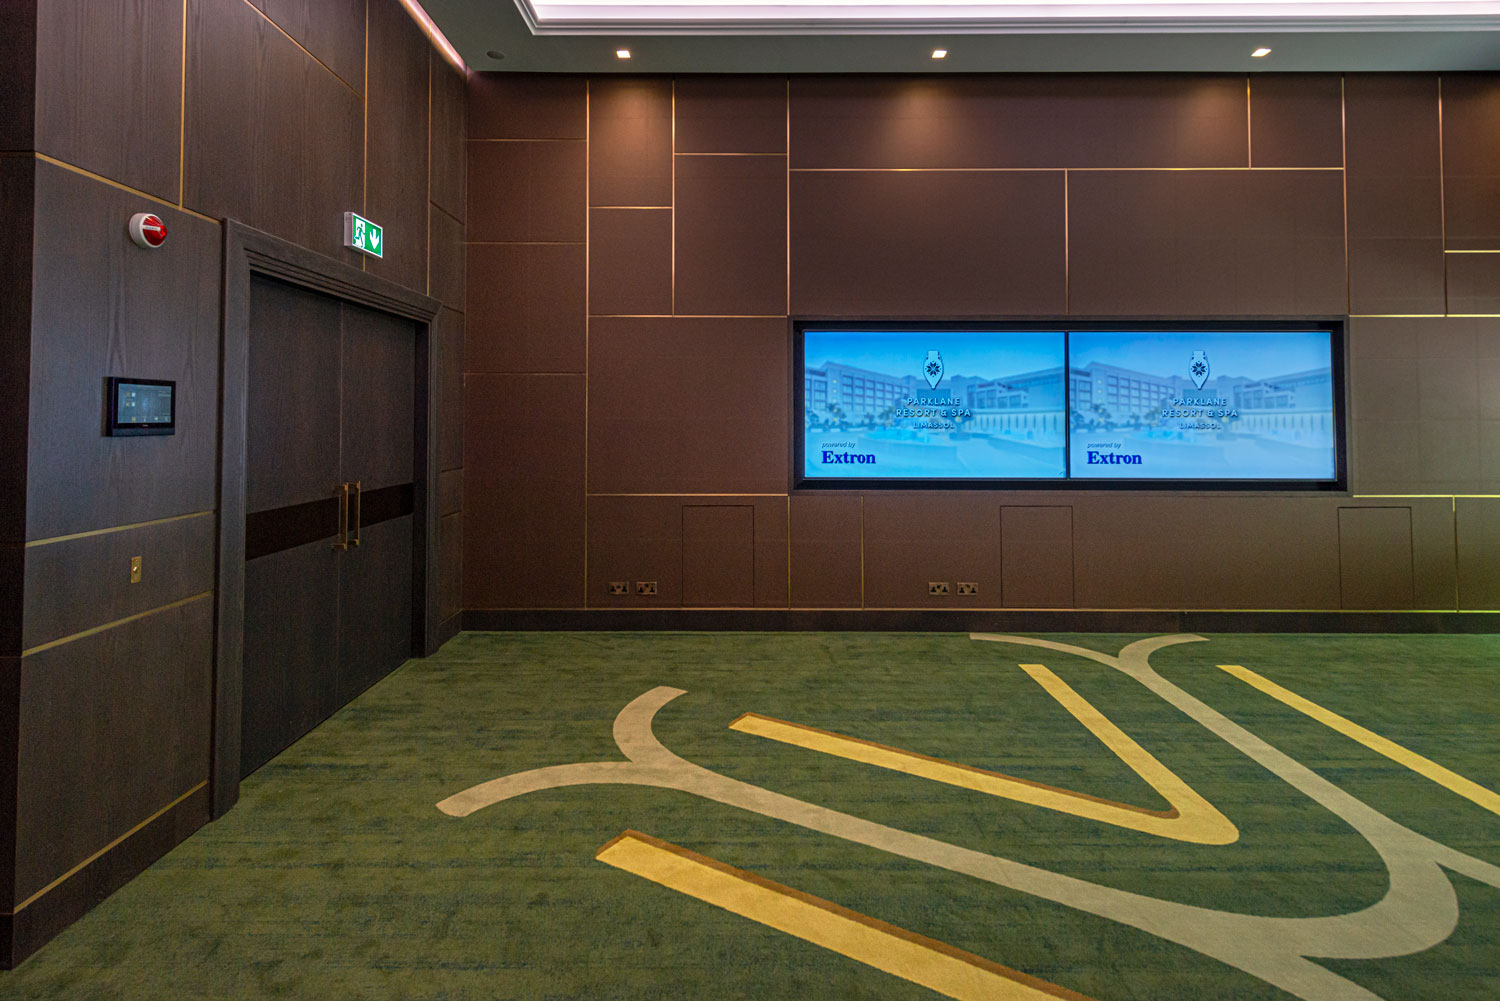 Pre-function area of the hotel with two wall-mounted displays